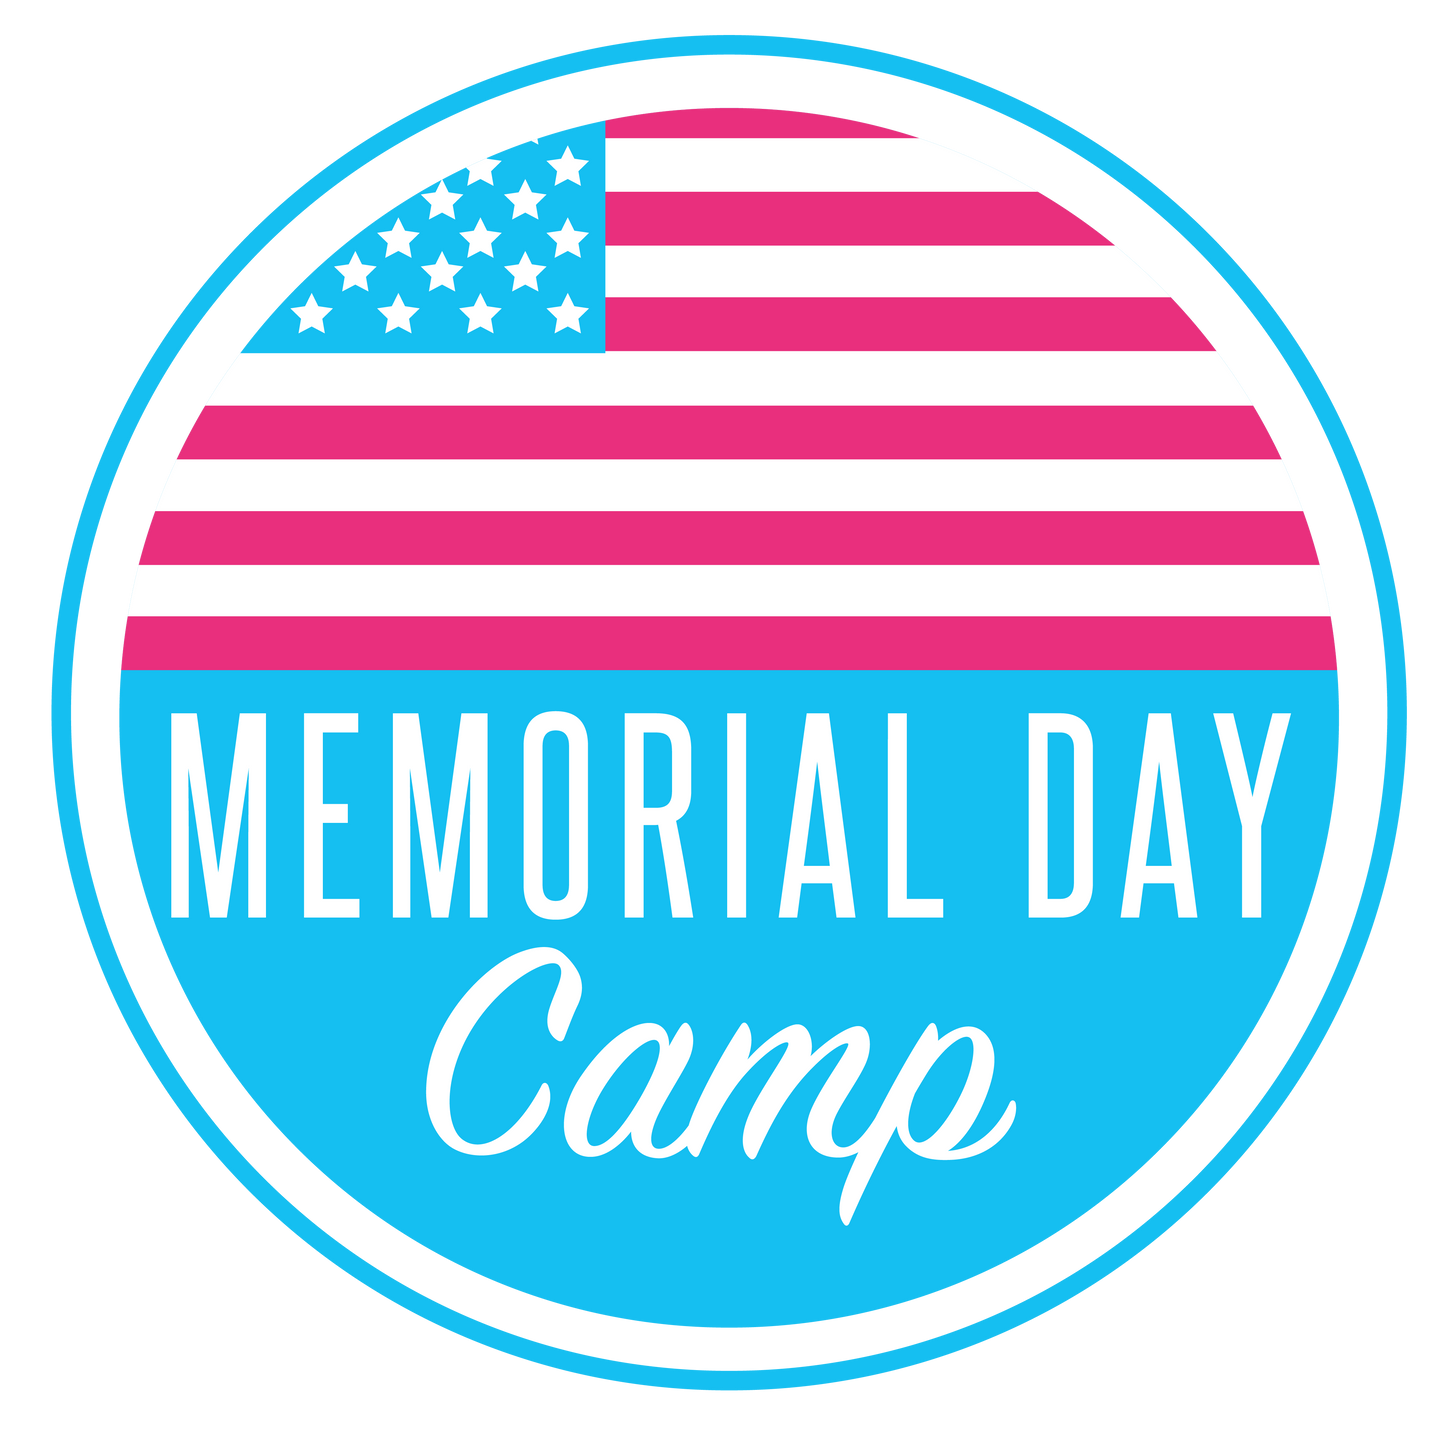 Memorial Day: Monday, May 27, 9am-3pm